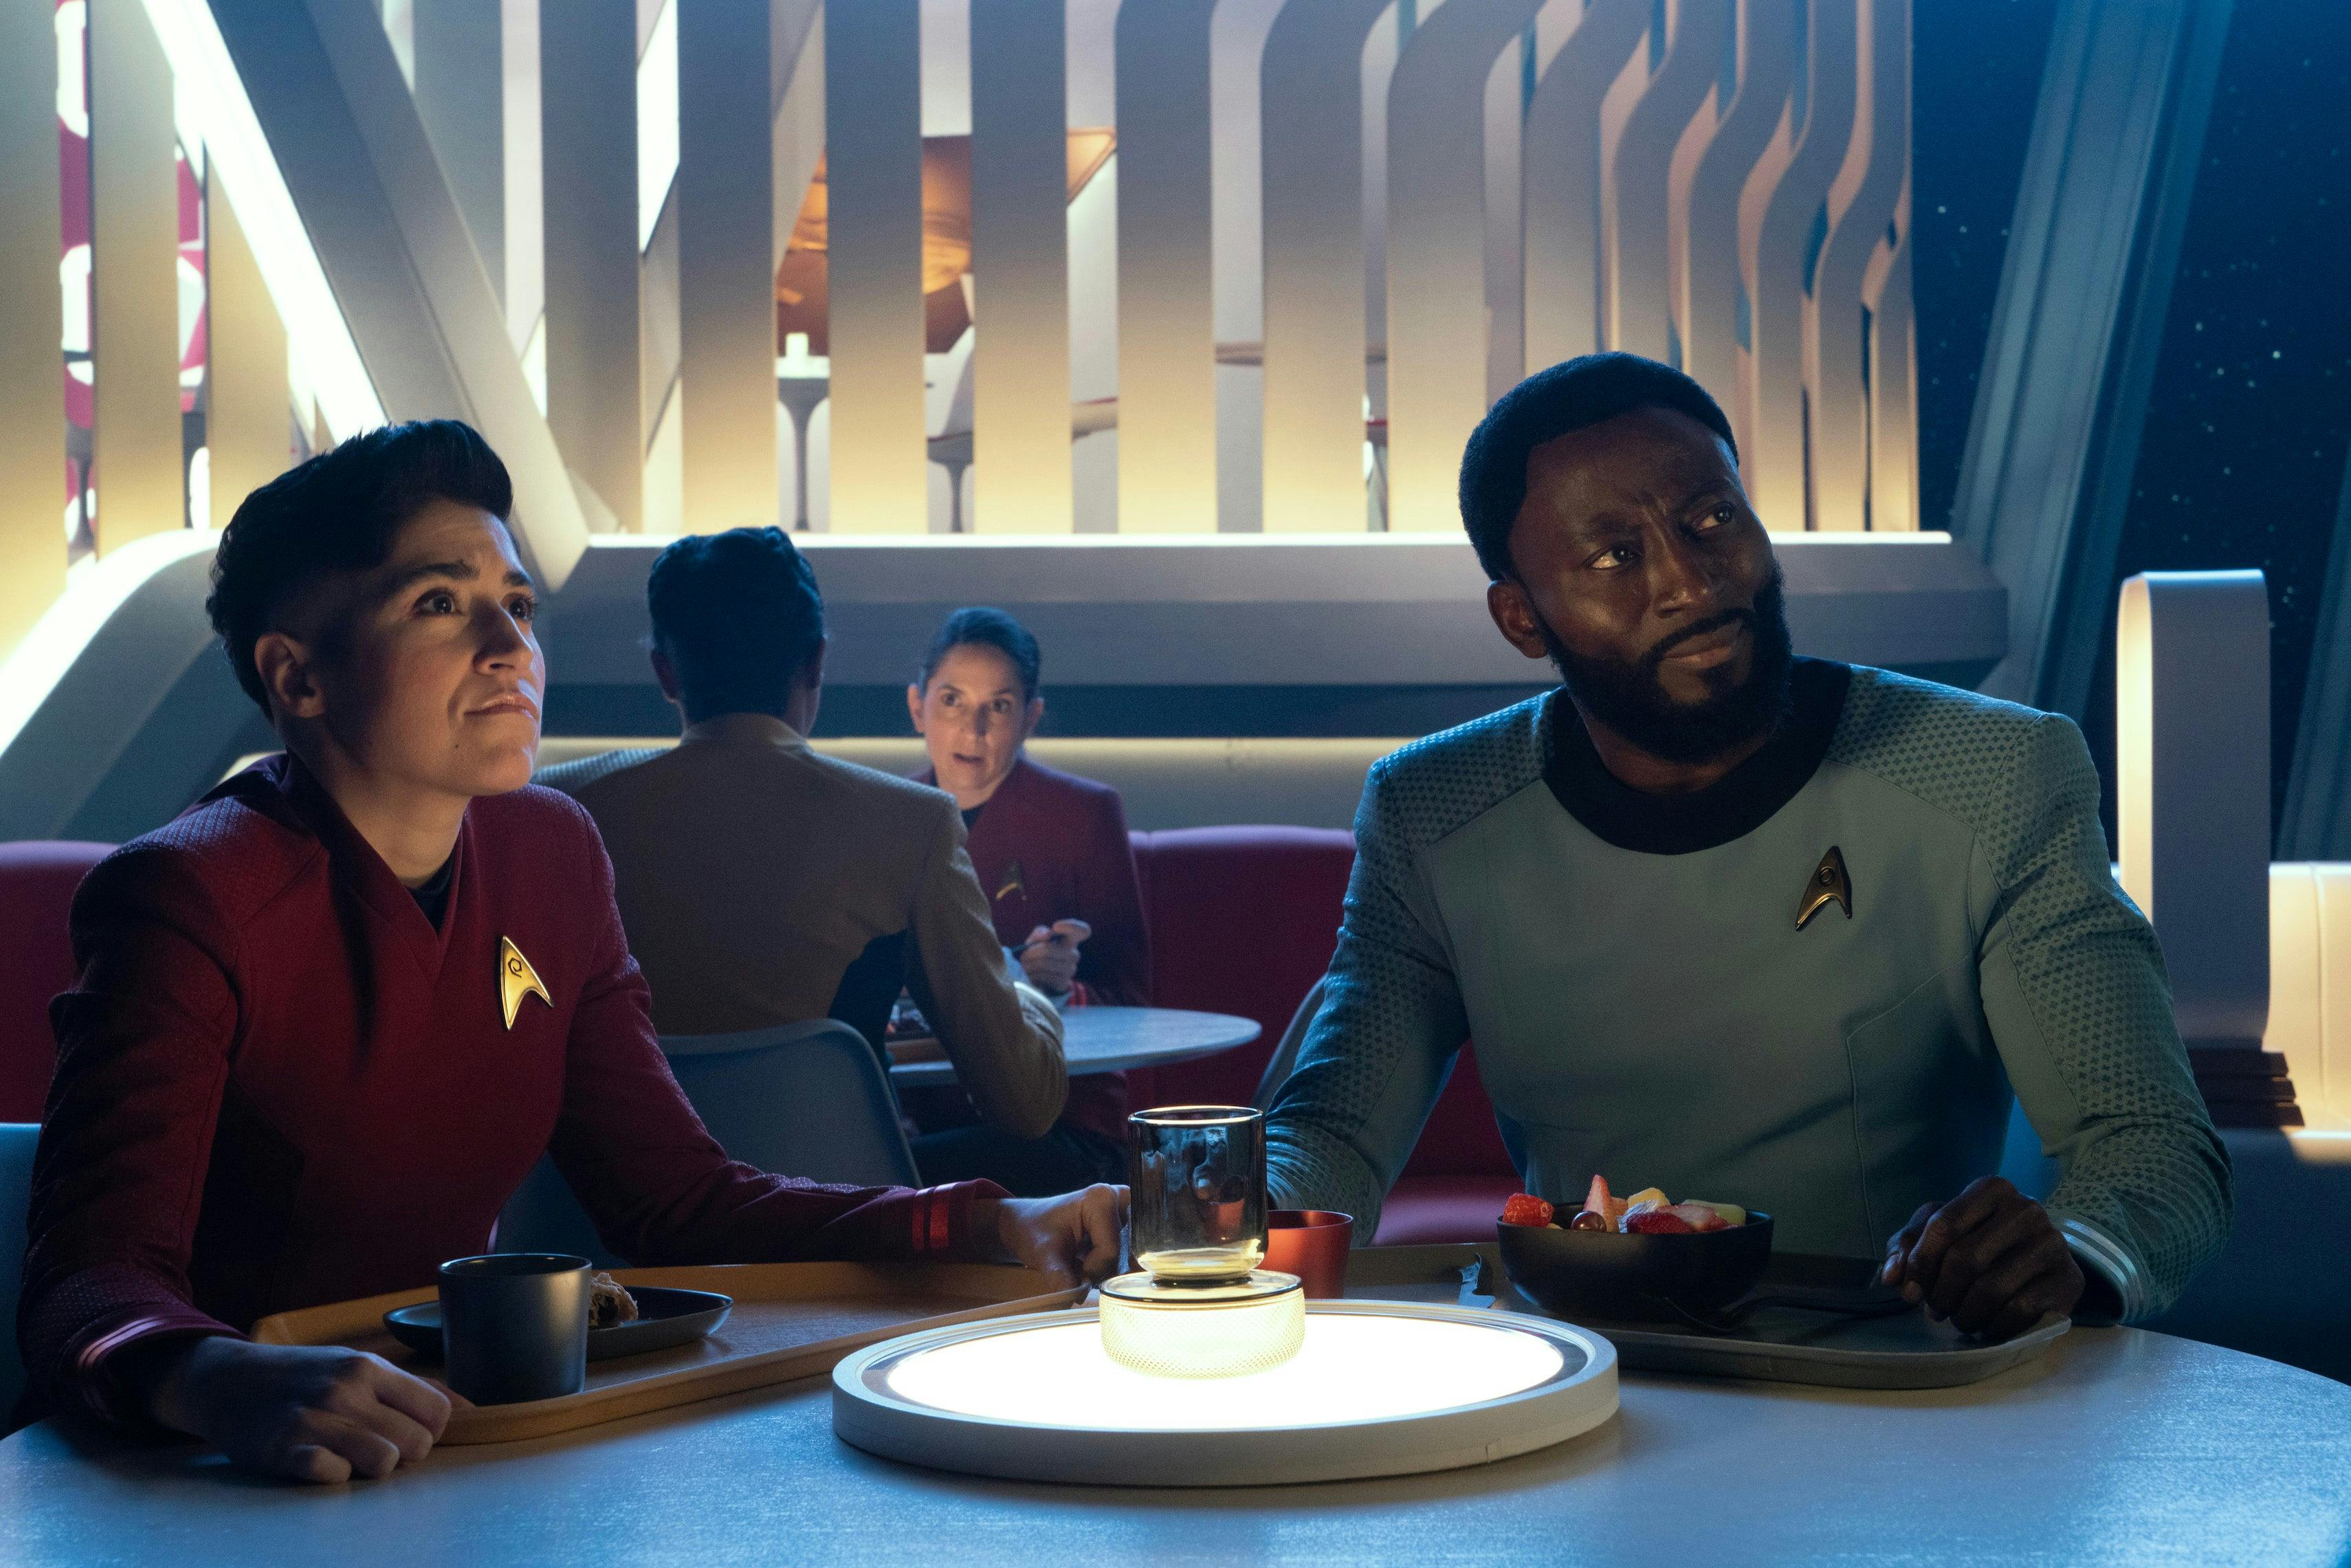 The seated Erica Ortegas and M'Benga look up from their table in the mess hall in 'Ad Astra per Aspera'